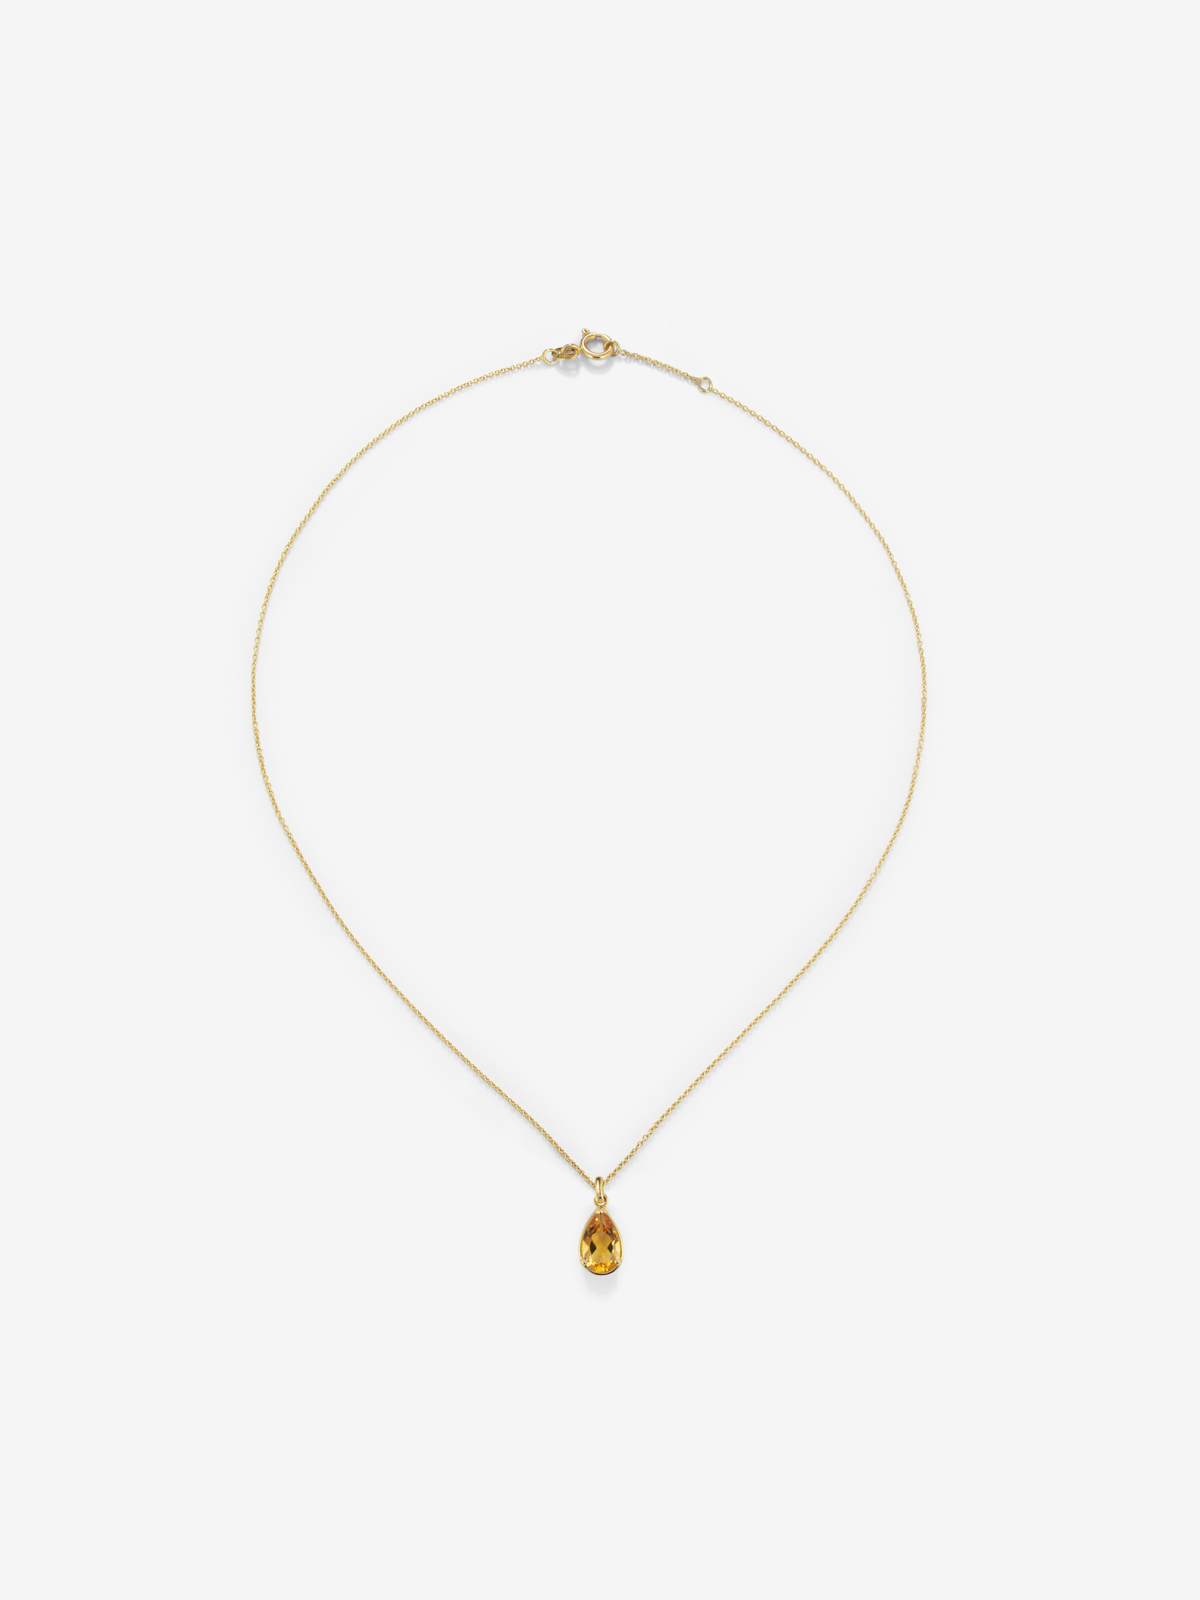 18K yellow gold pendant chain with citrine